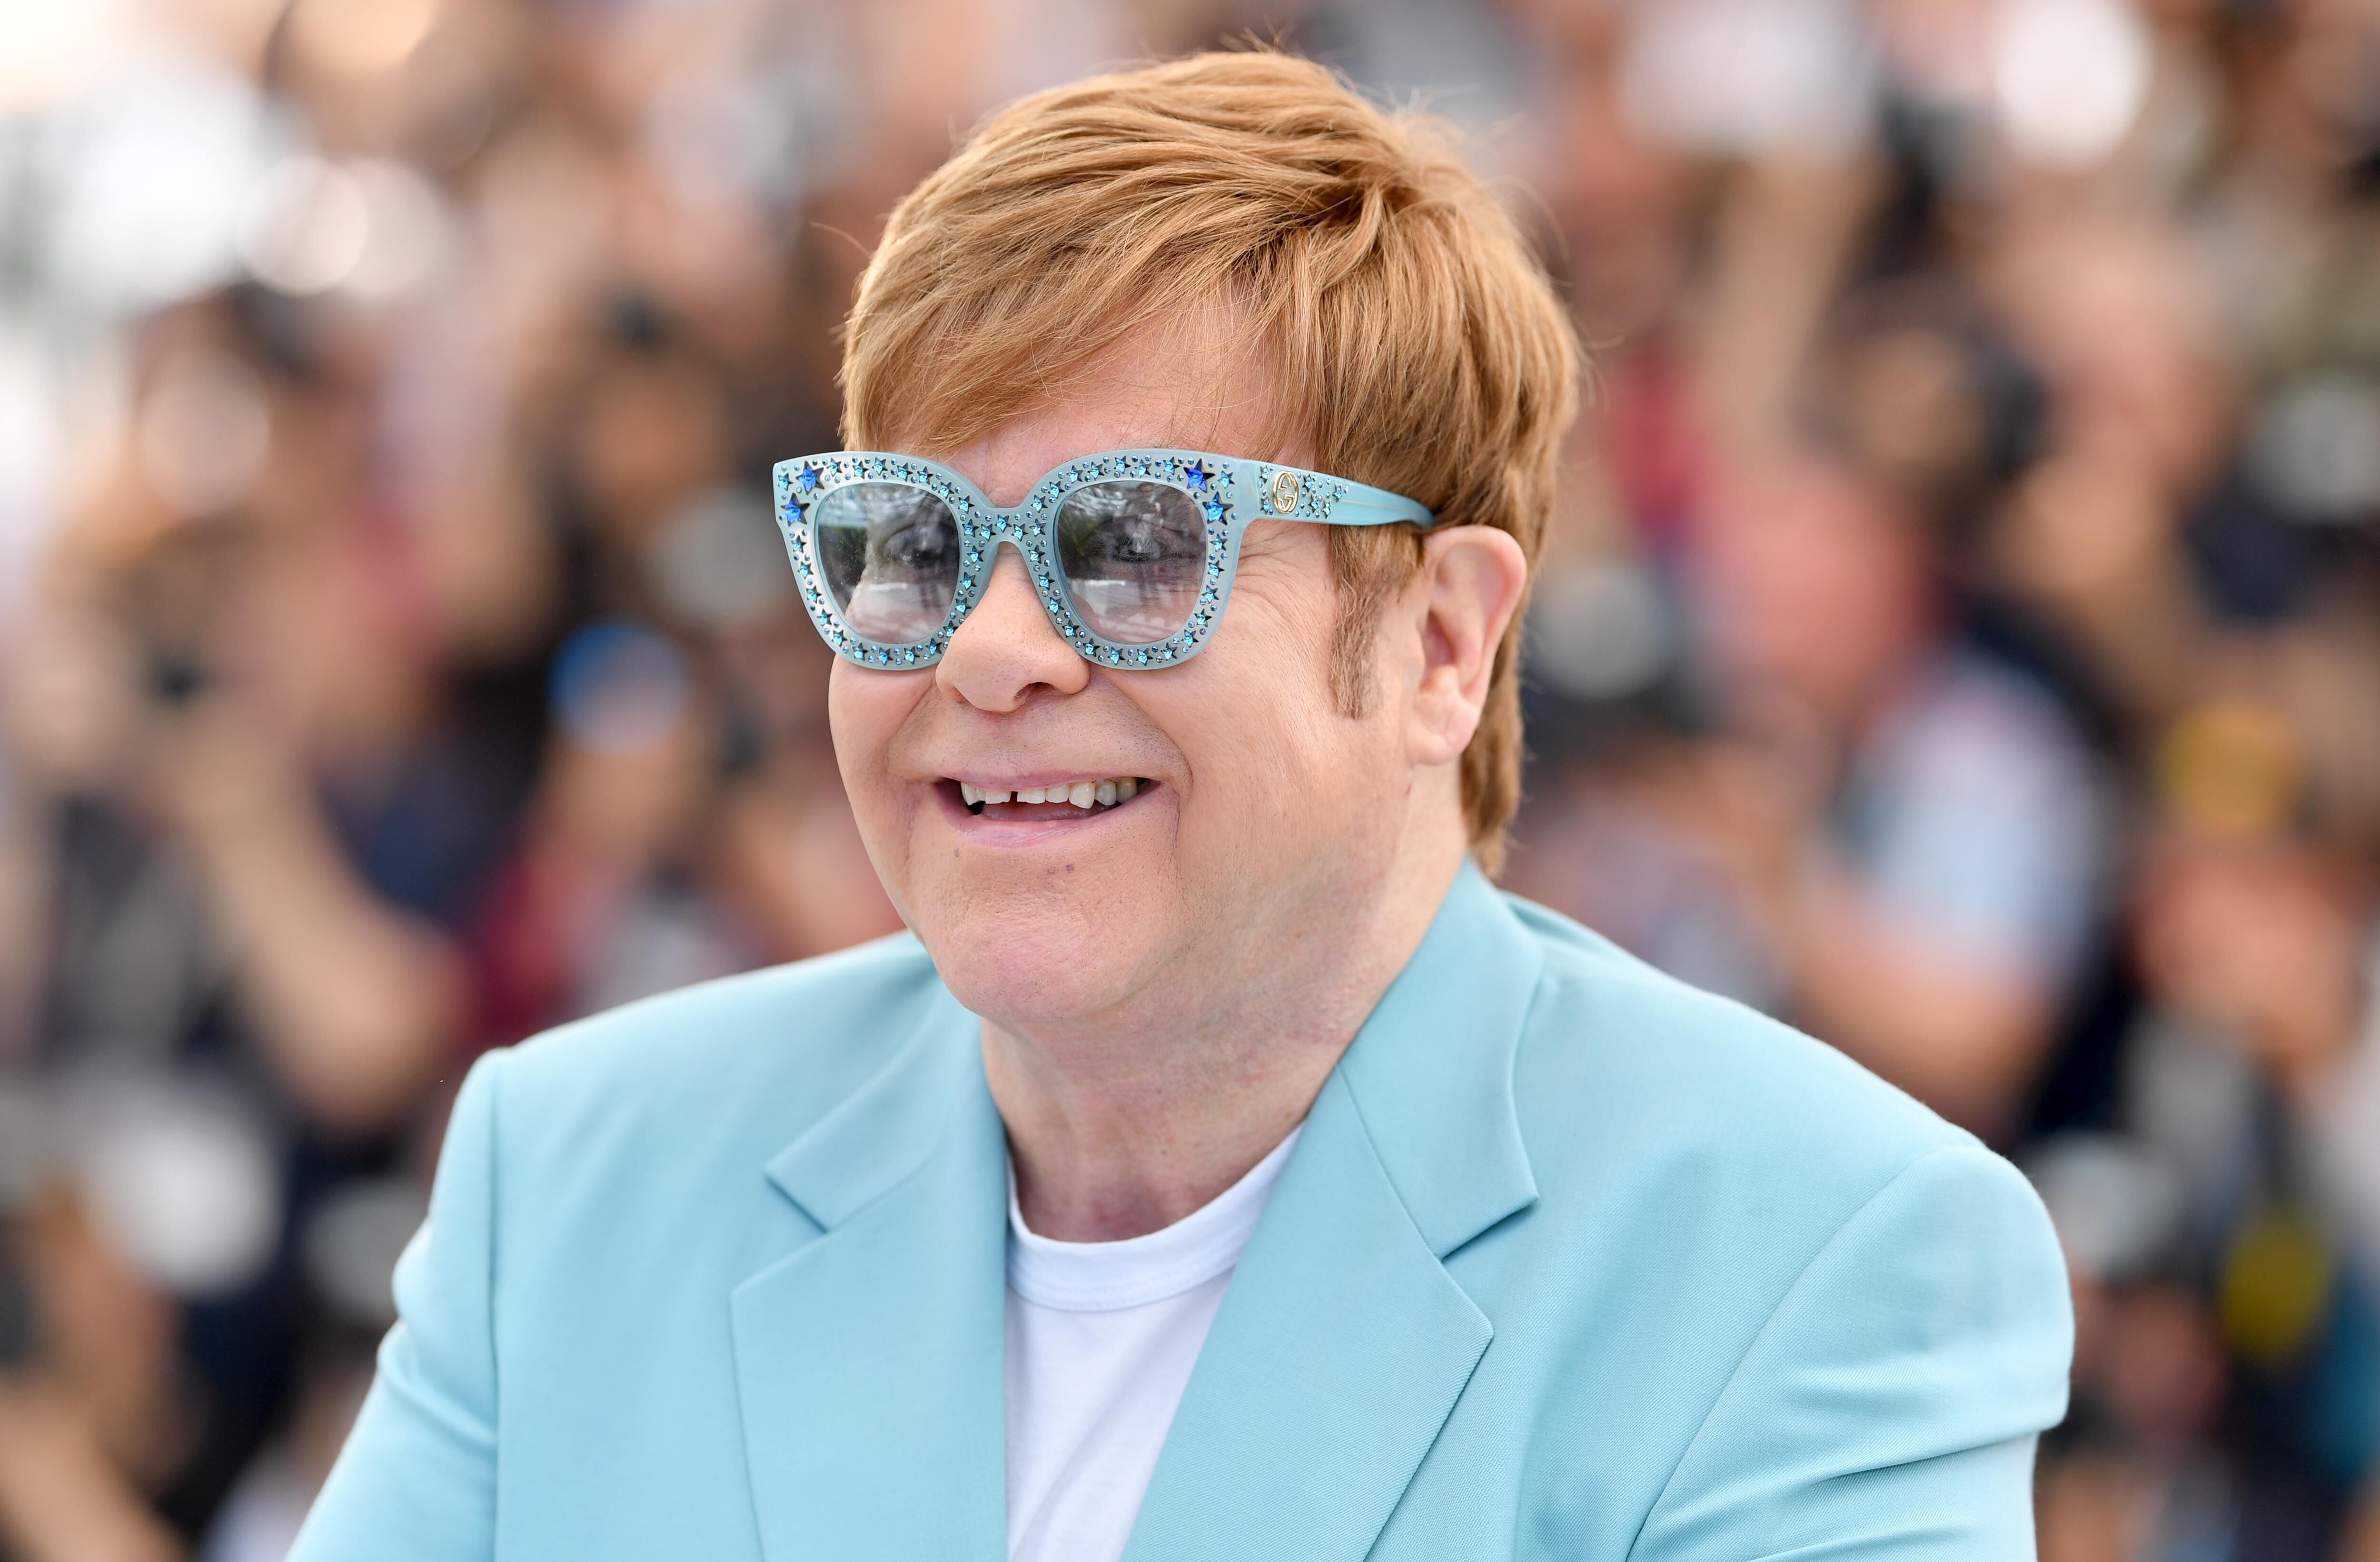 Sir Elton John attends the photocall for "Rocketman" during the 72nd annual Cannes Film Festival on May 16, 2019 in Cannes, France | Photo: Getty Images